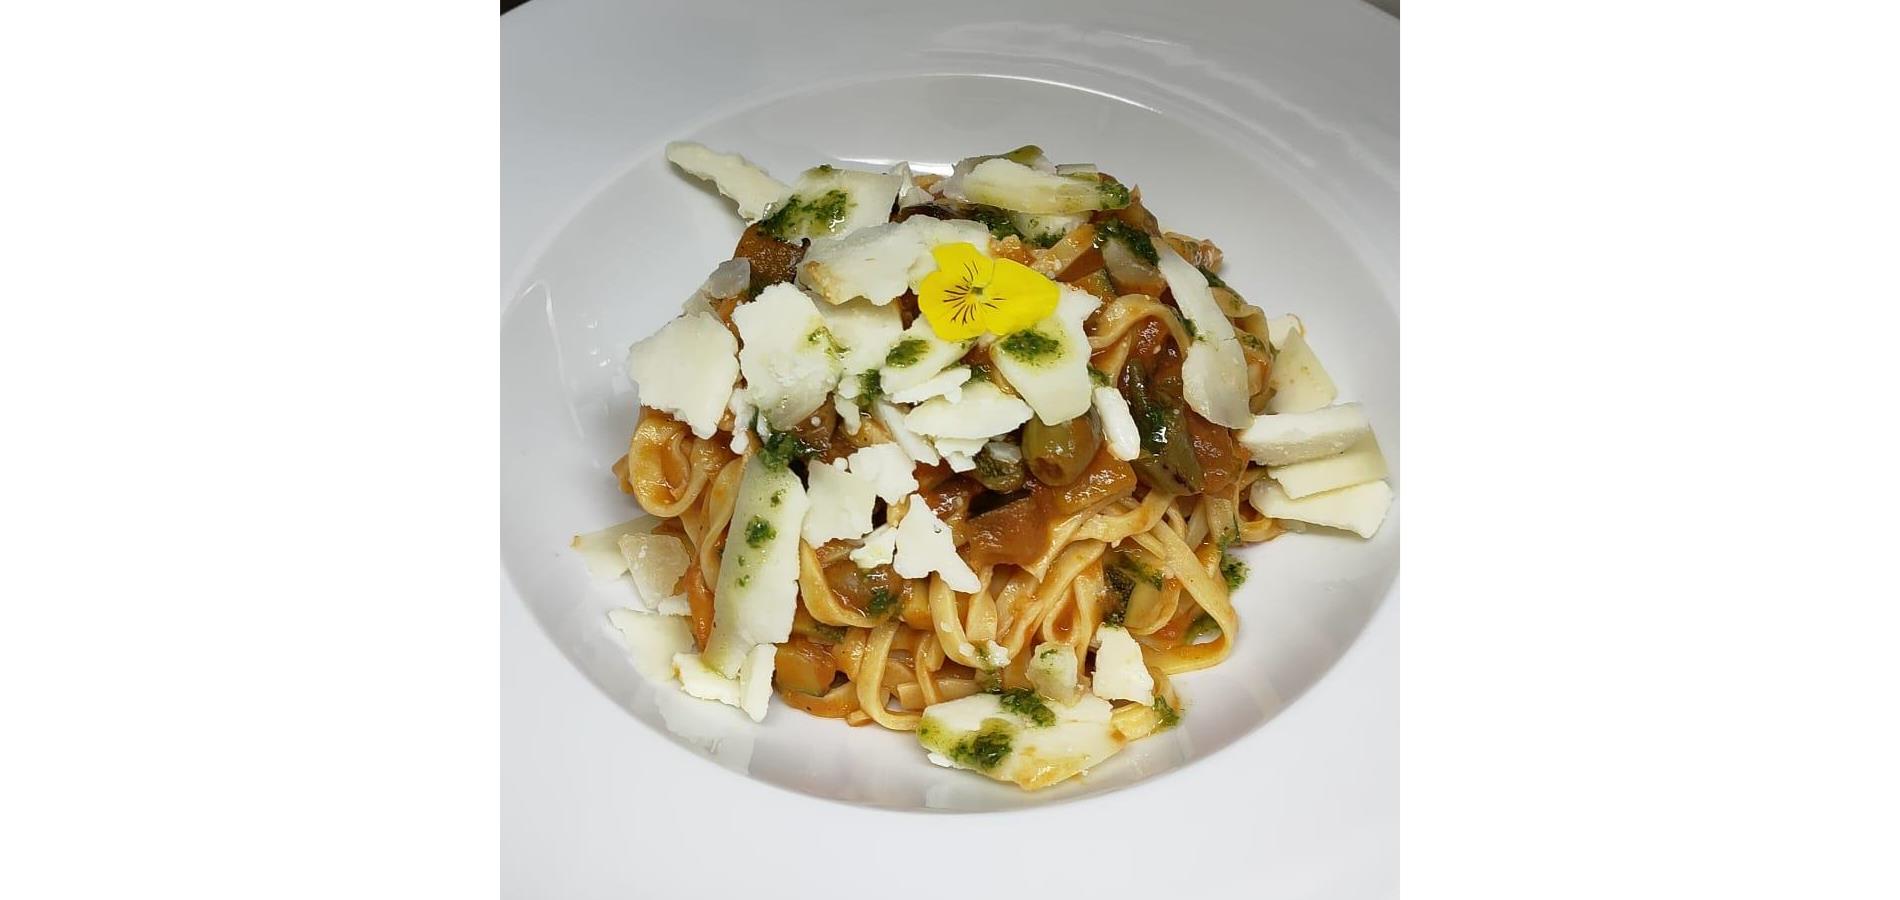 Paarlbrot Tagliatelle with Home-Made Salsiccia, Taggiasca Olives and Spruce Shoot Oil